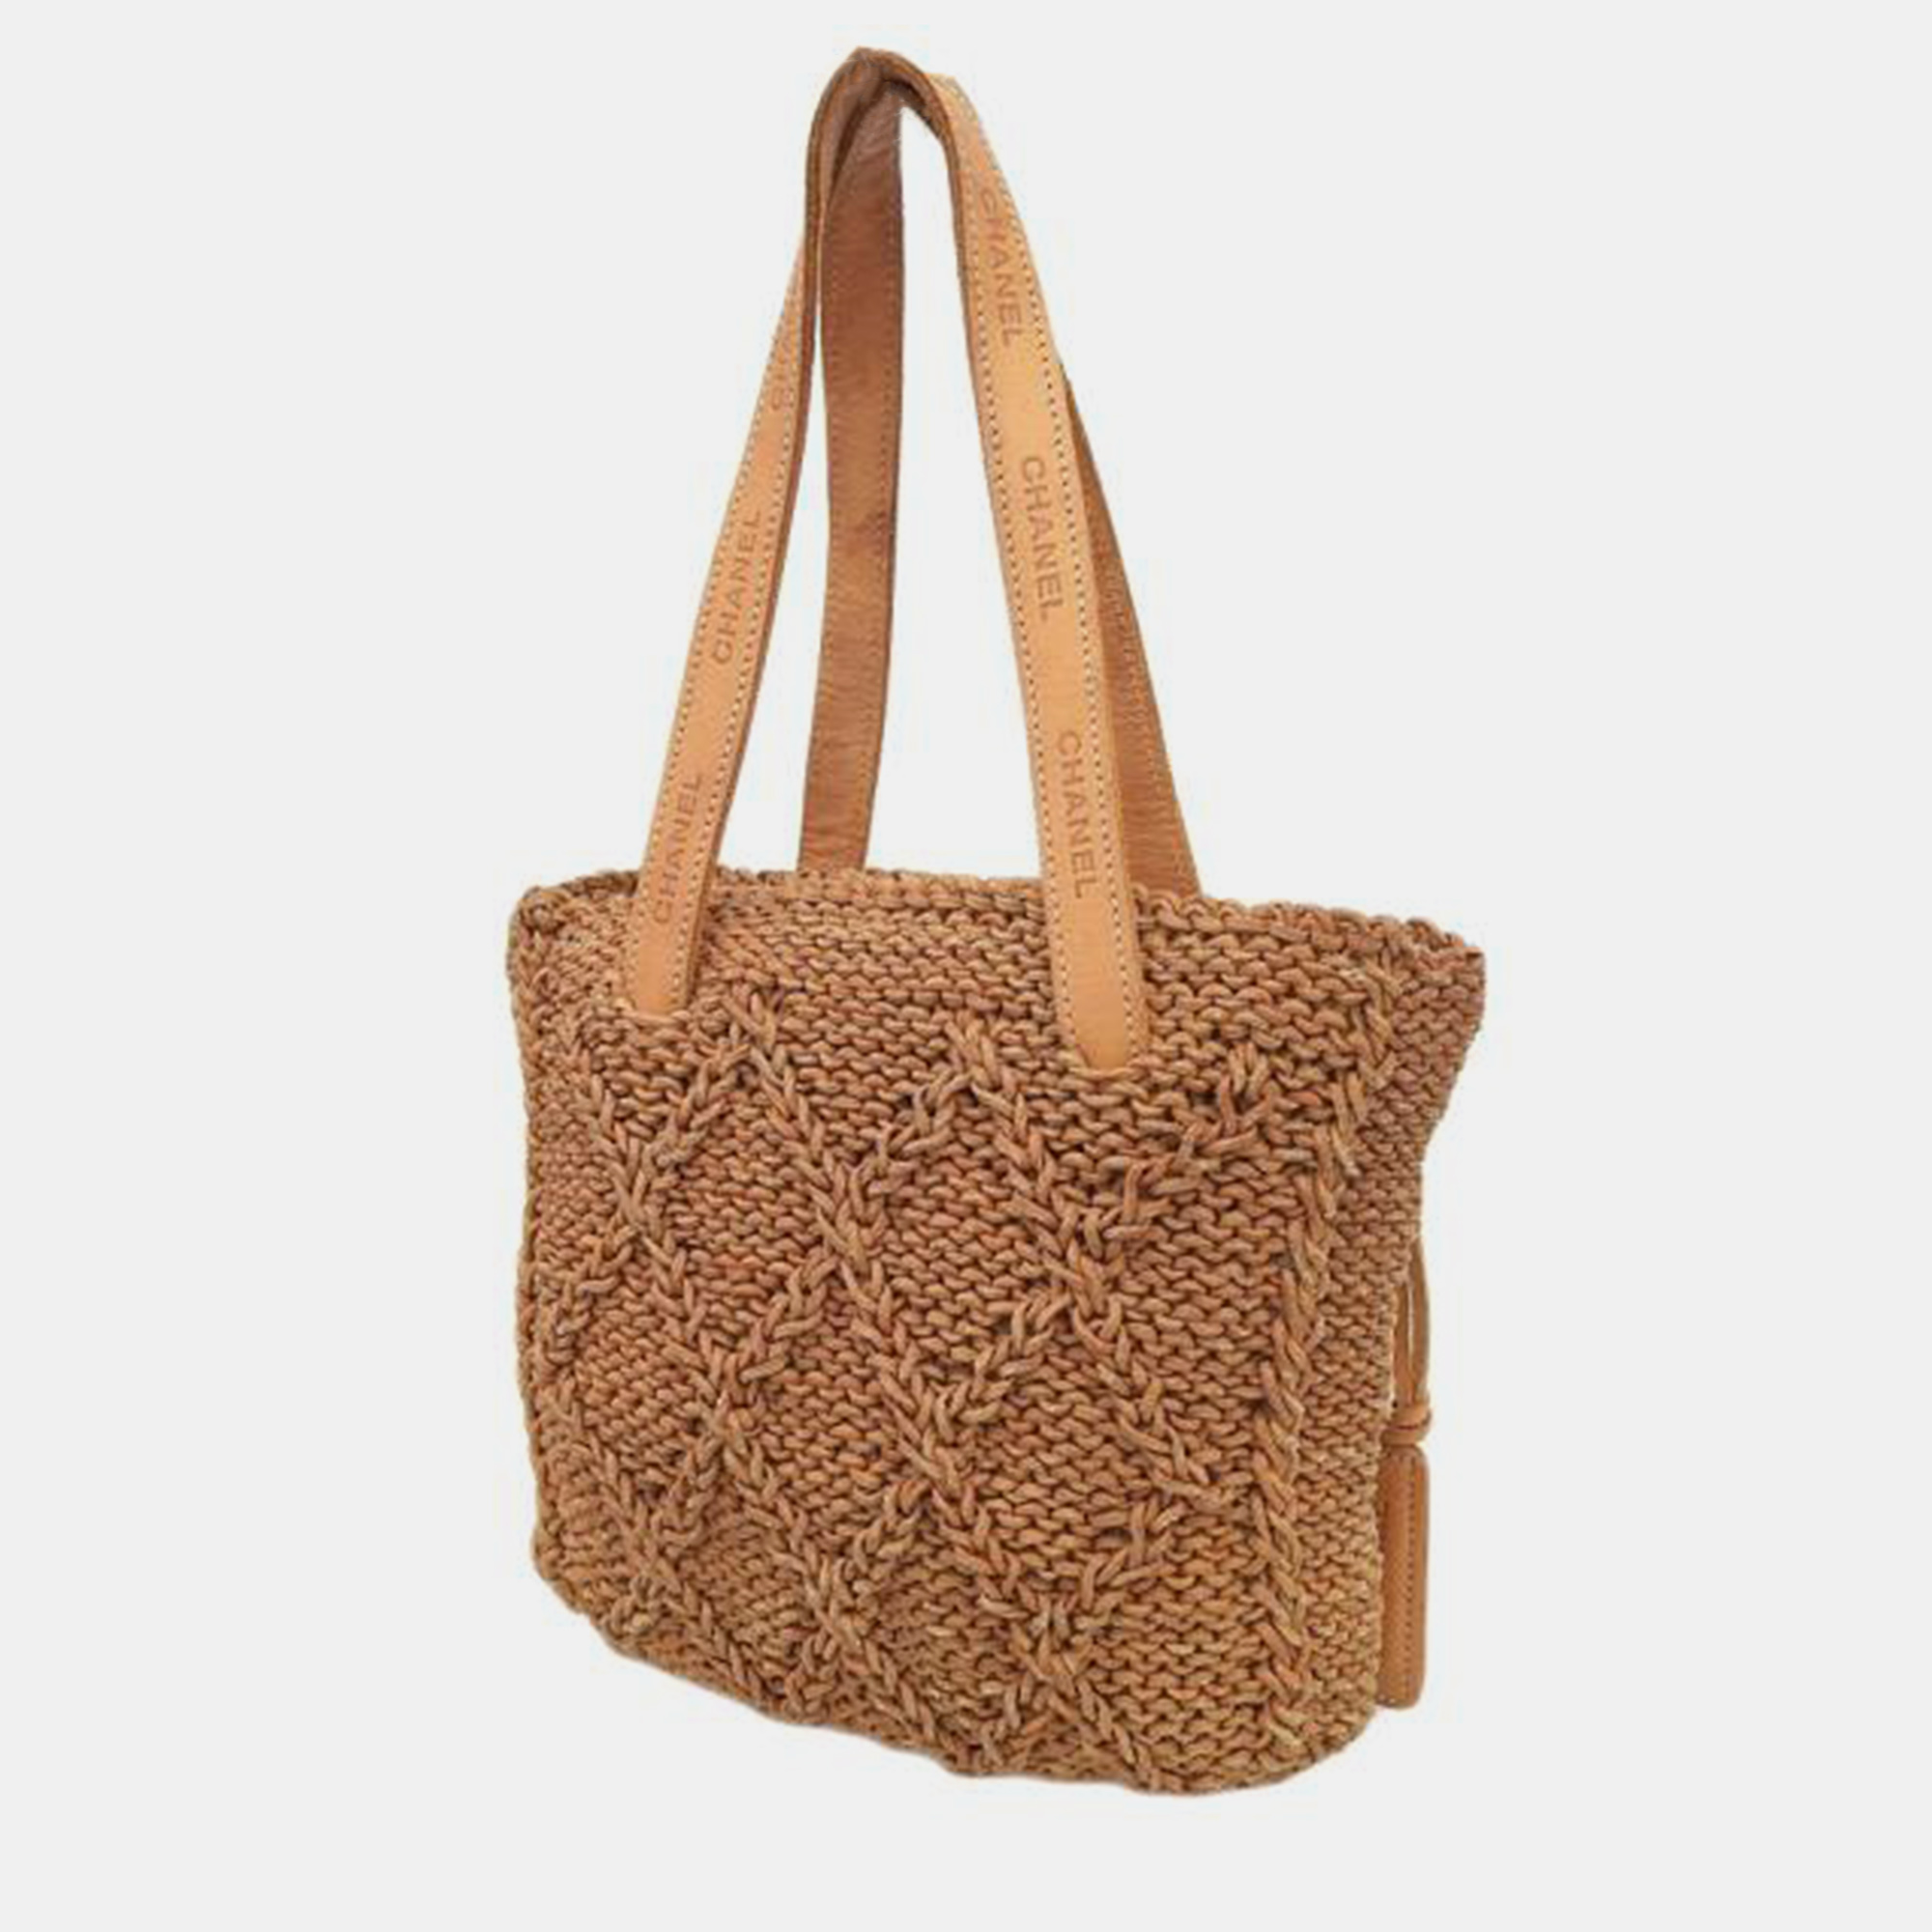 Chanel Brown Woven Leather Tote Bag